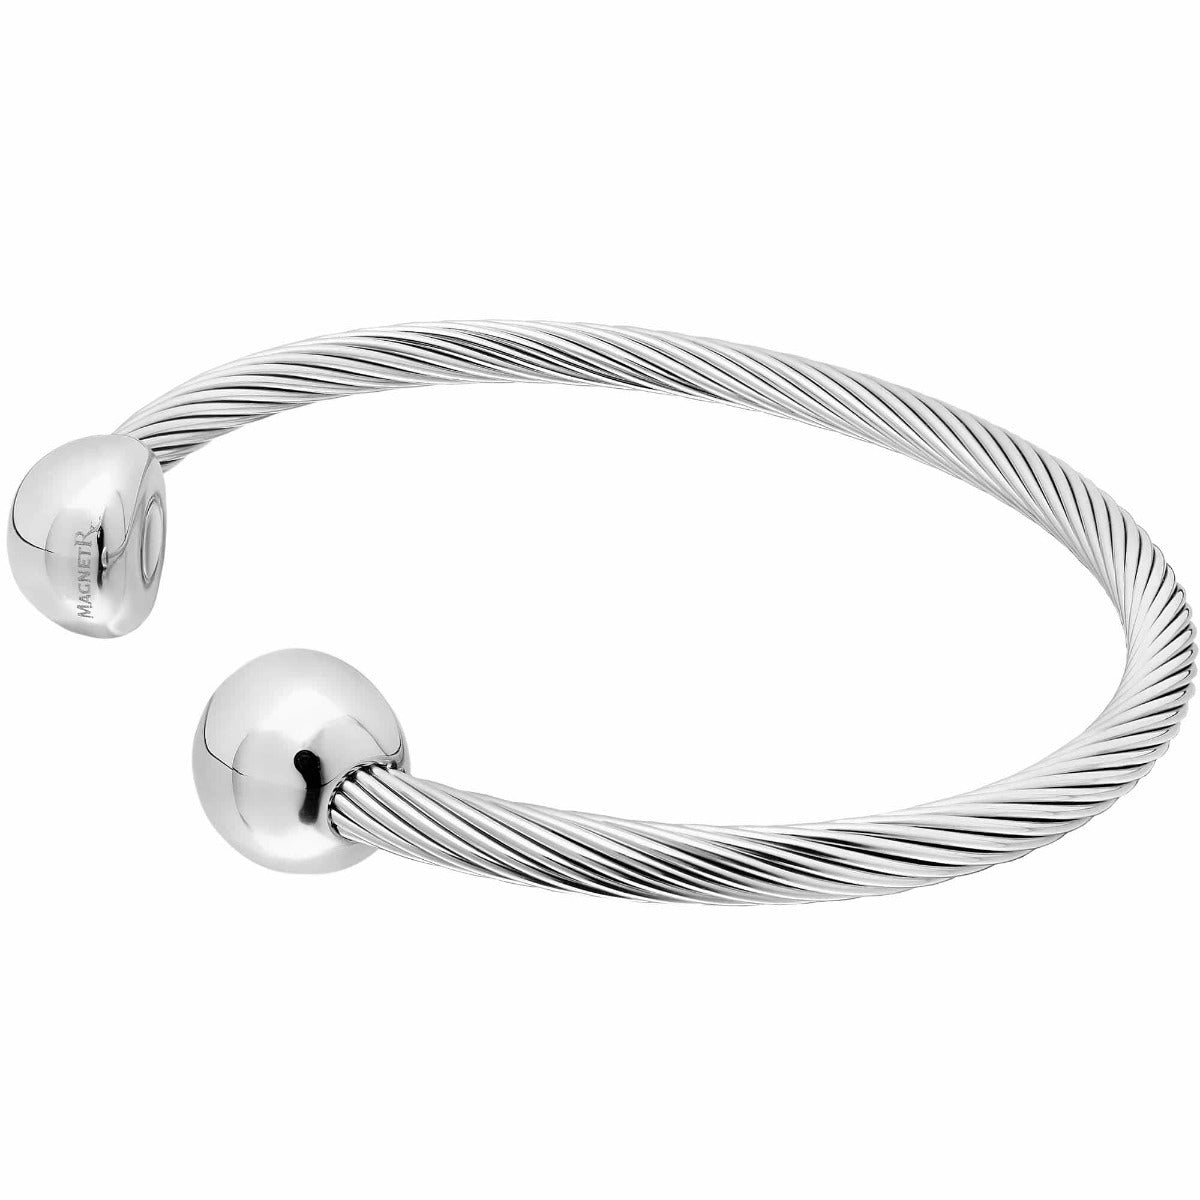 Twisted Cable Magnetic Bracelet Cuff (Silver)